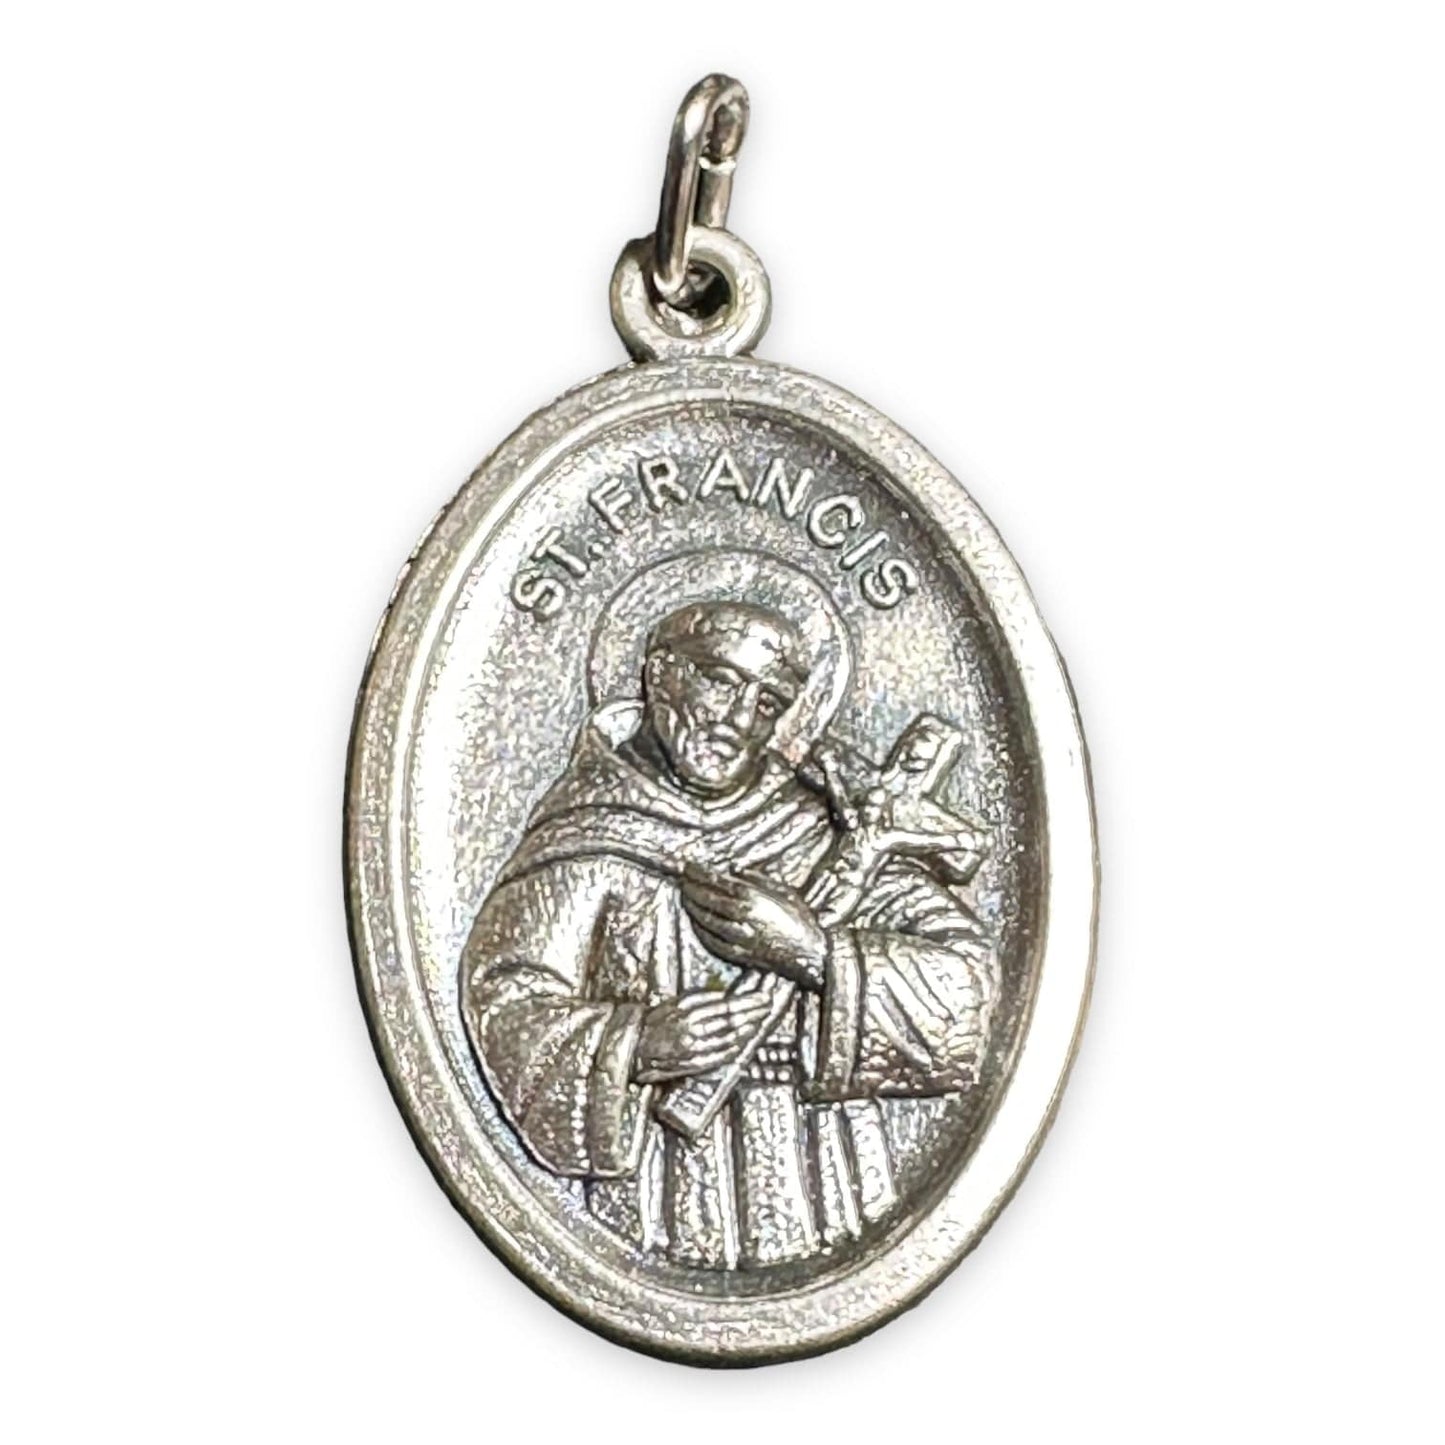 Catholically Medal Saint Francis of Assisi relic medal - Franciscan Pendant - Blessed By Pope